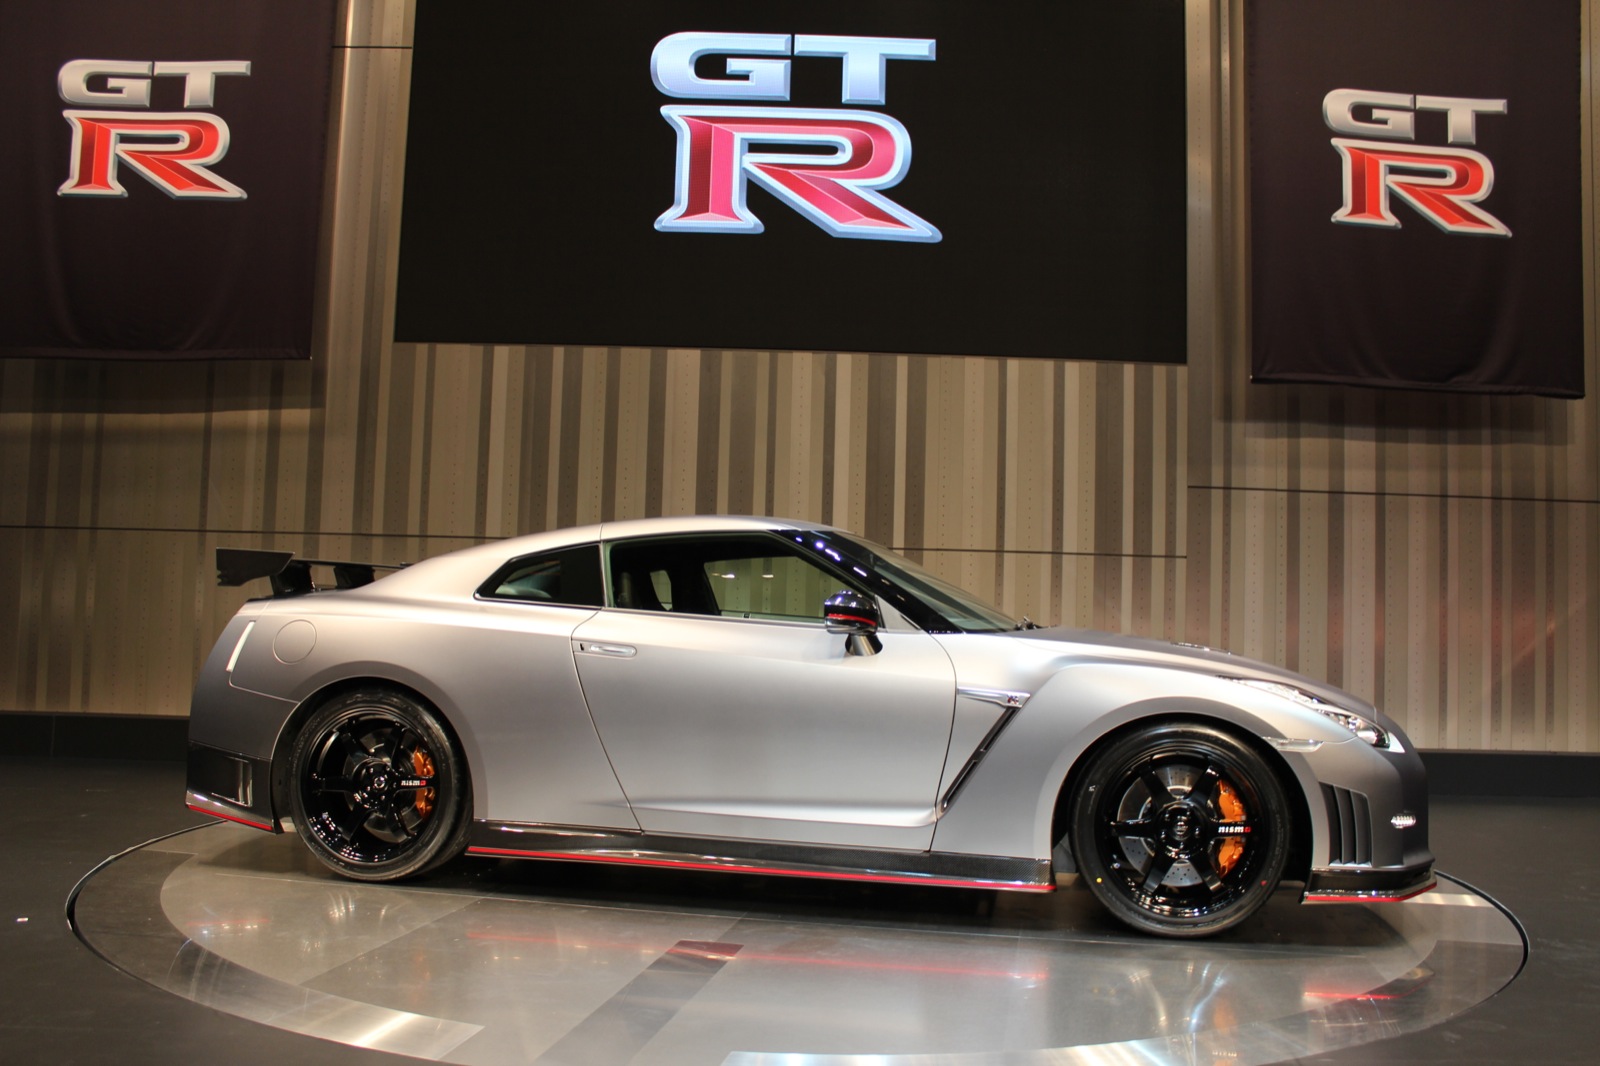 2015-nissan-gt-r-nismo--tokyo-motor-show-preview-event-nissan-global-headquarters_100446455_h